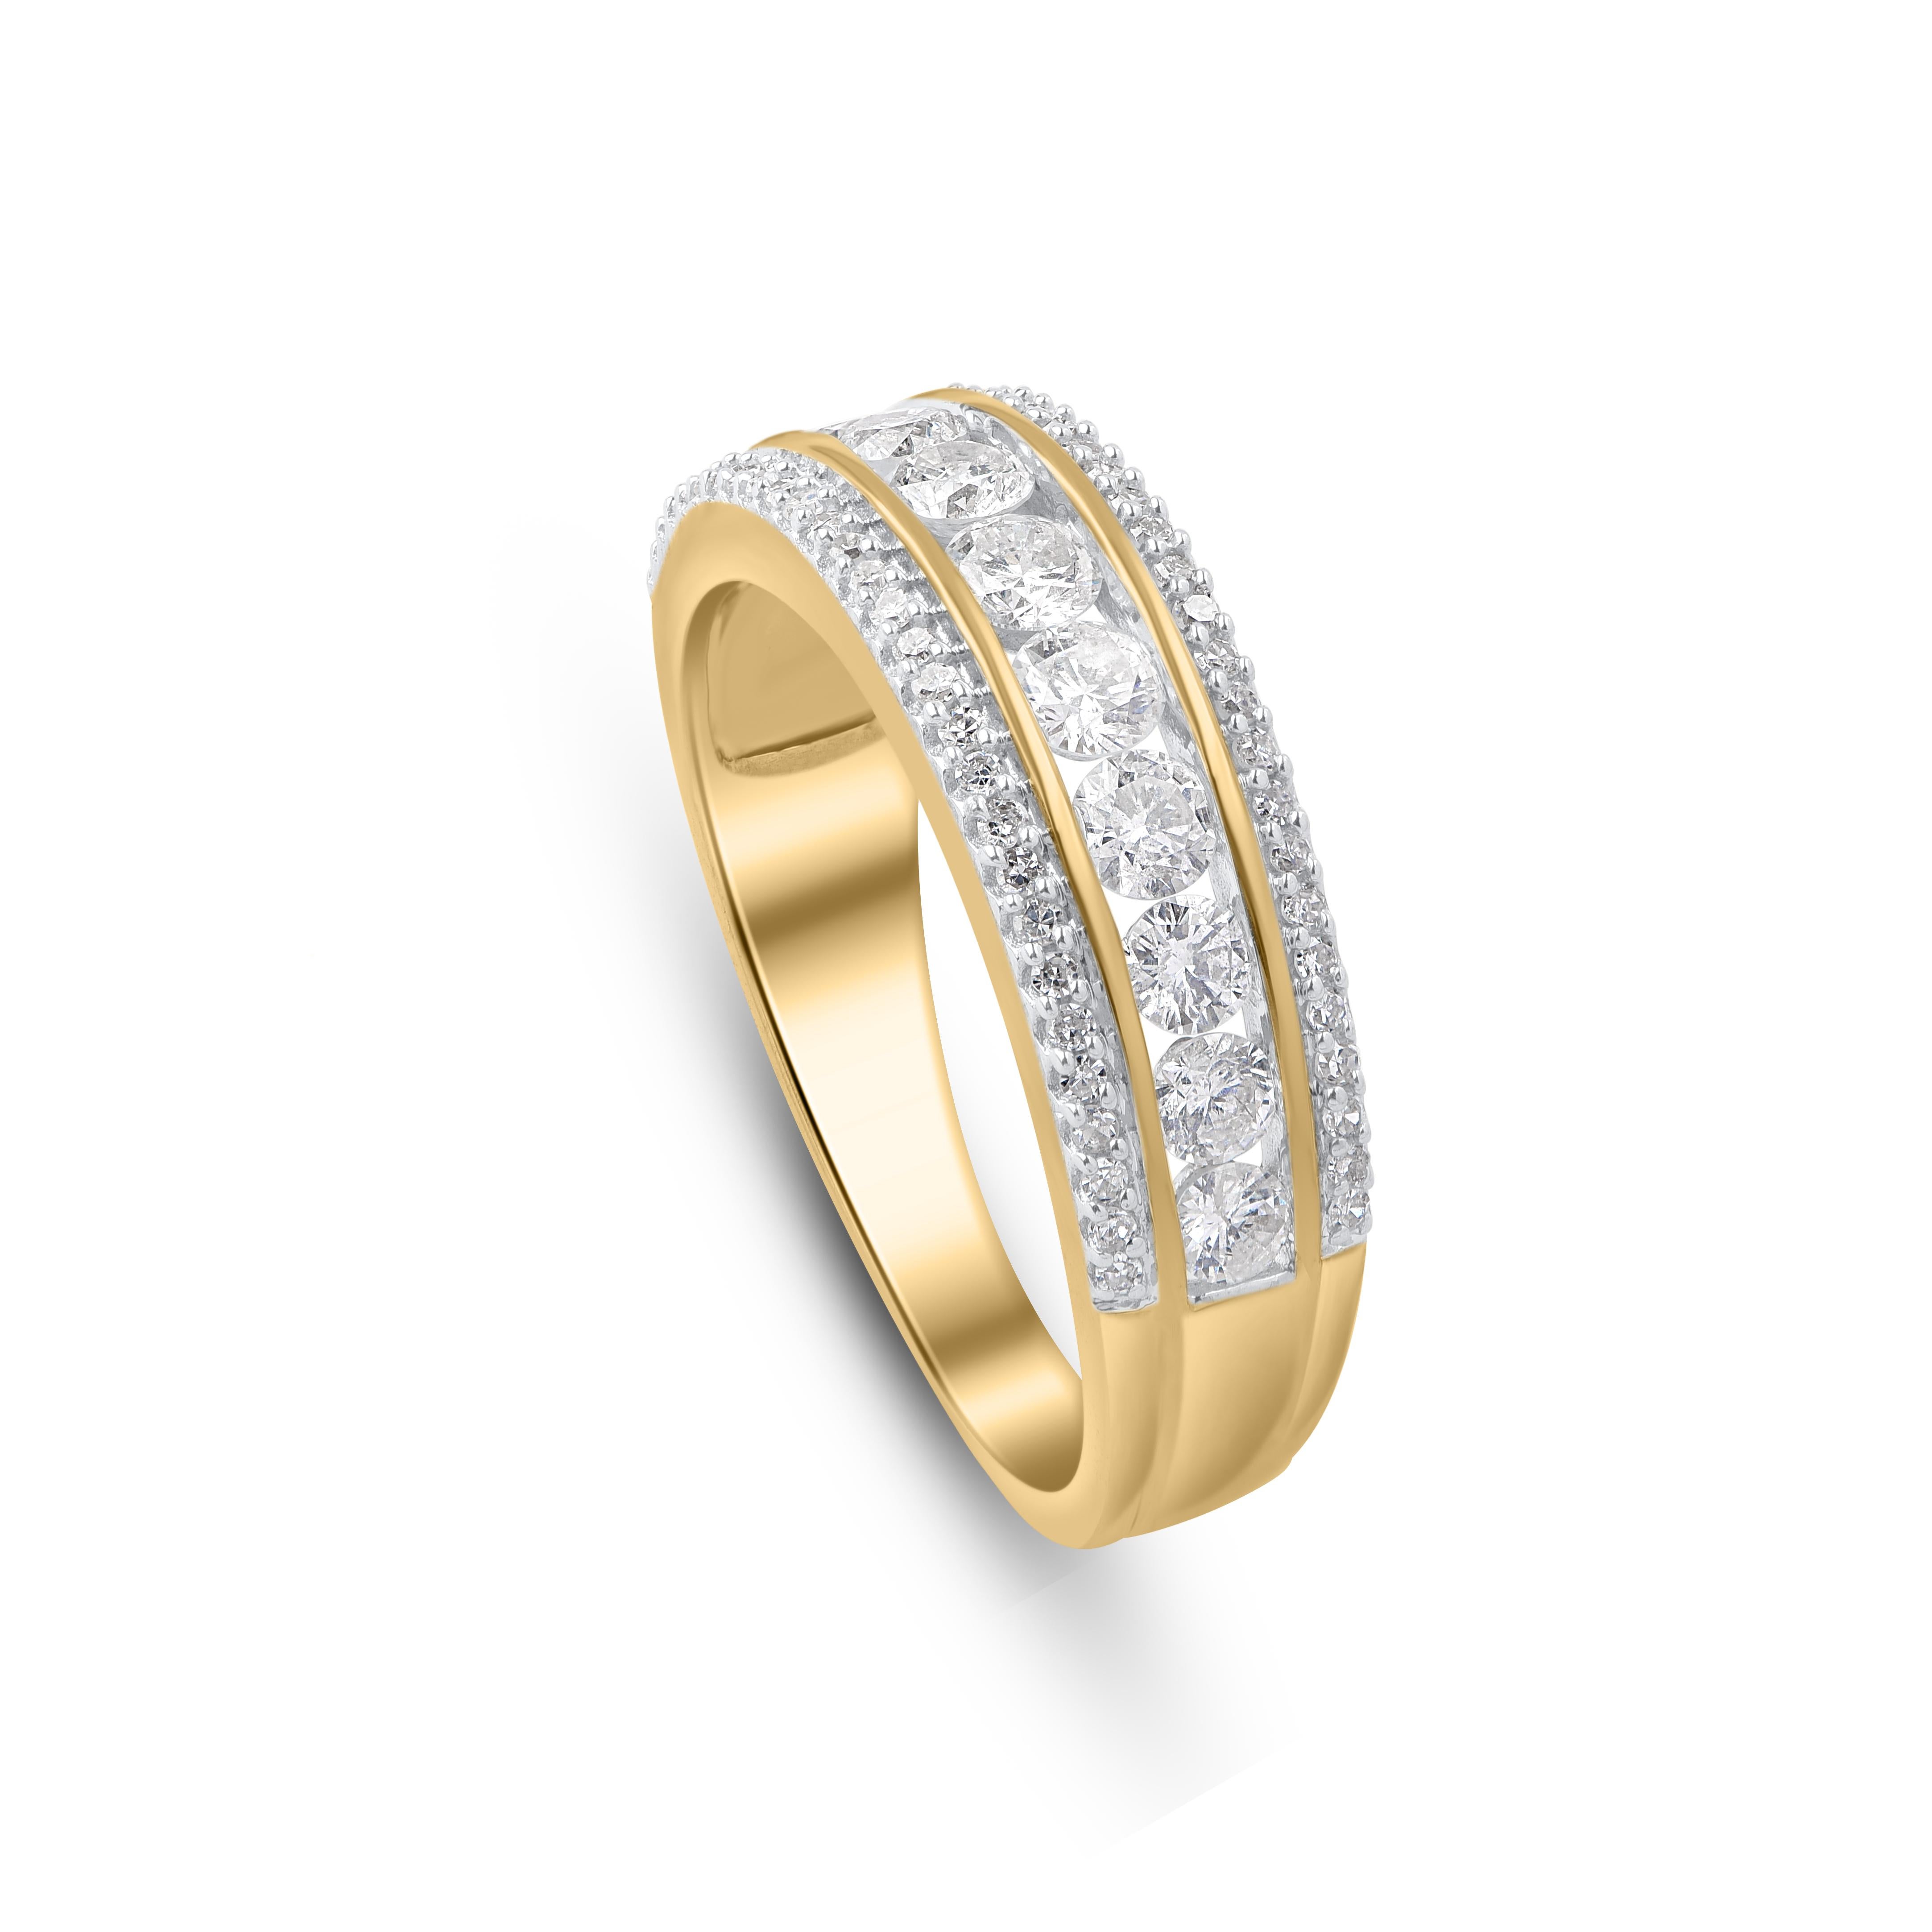 This designer diamond engagement band is simple yet striking. This diamond studded engagement band is made by our experts in 10 kt yellow gold and accentuated with 69 round-cut diamonds in prong and channel setting Diamonds are graded H-I Color, I2